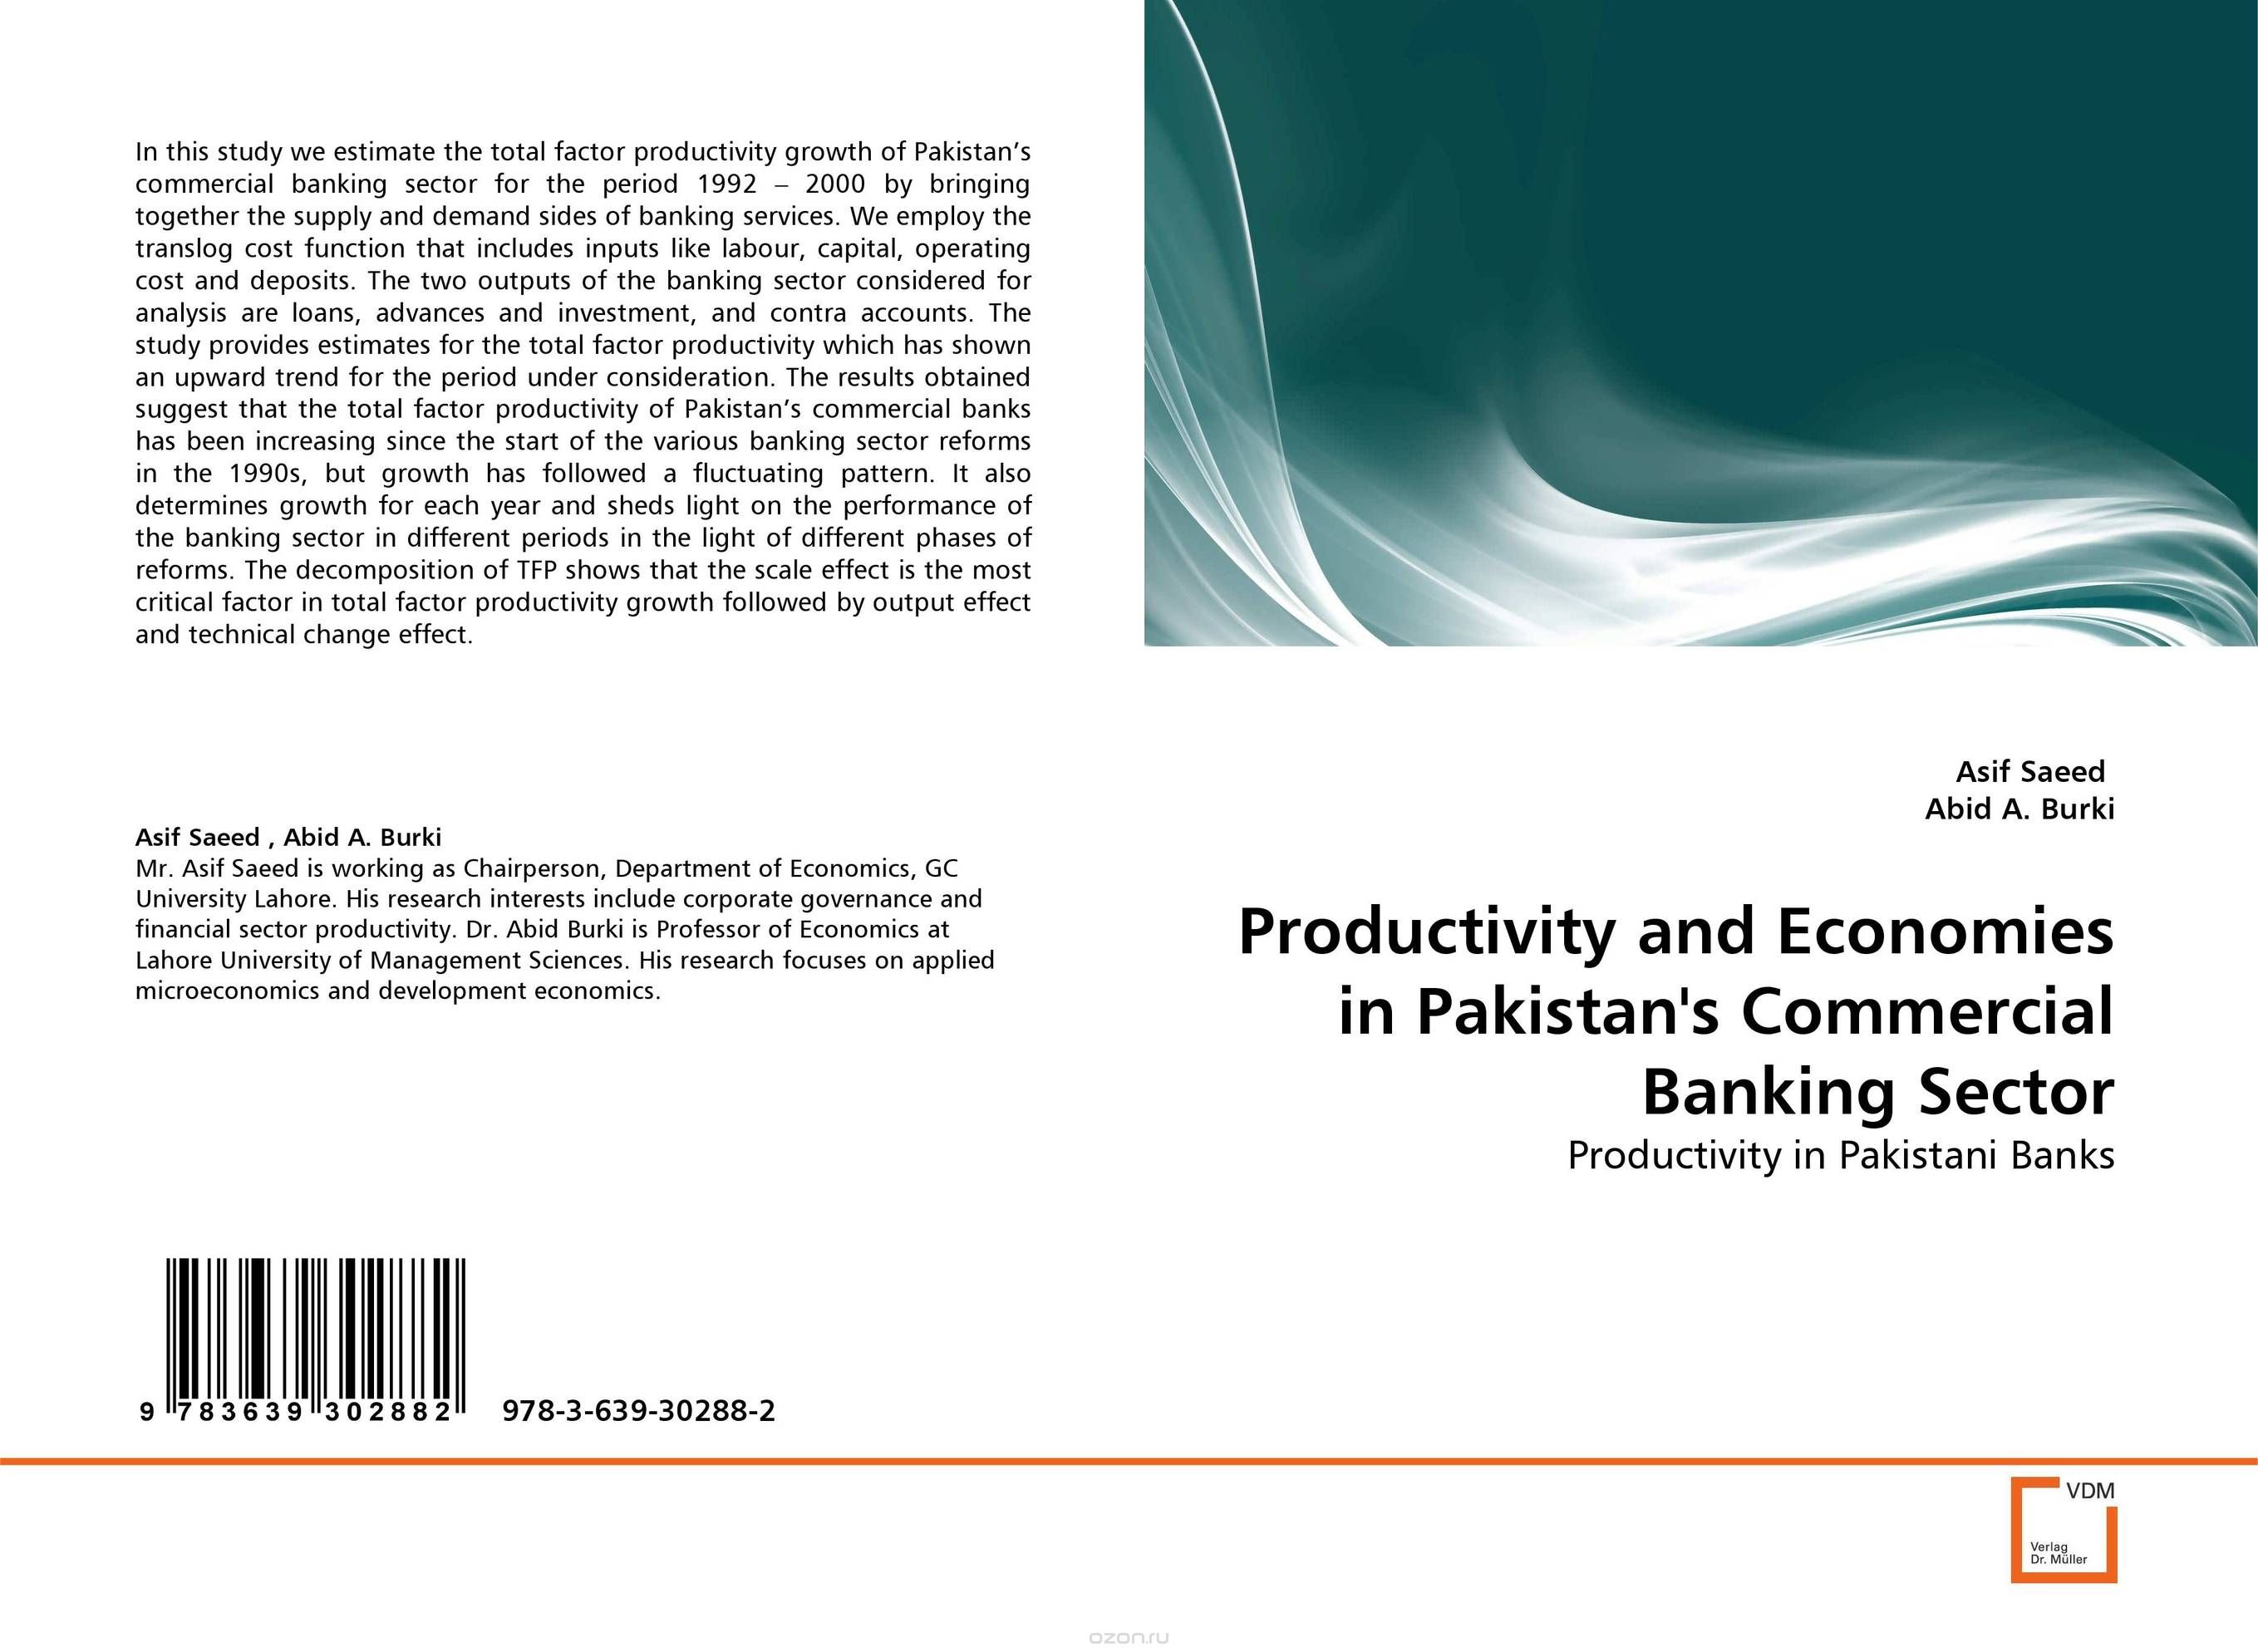 Productivity and Economies in Pakistan''s Commercial Banking Sector